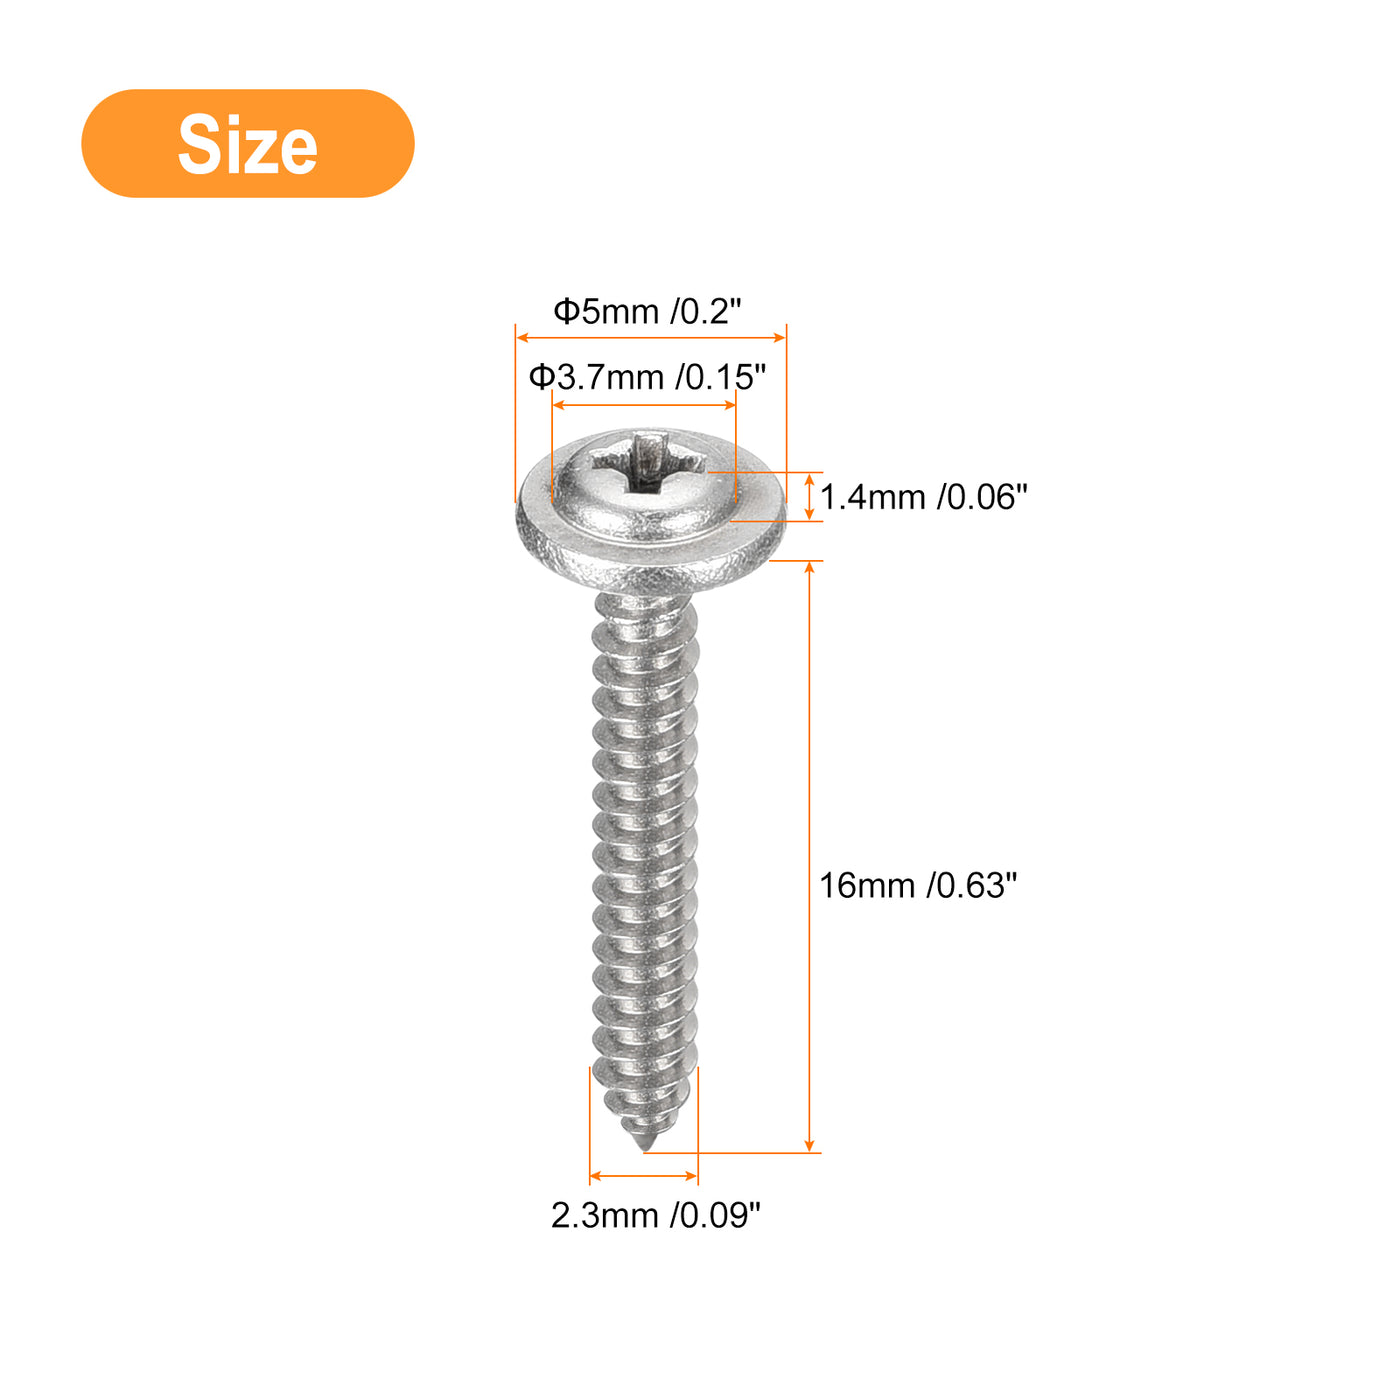 uxcell Uxcell ST2.3x16mm Phillips Pan Head Self-tapping Screw with Washer, 100pcs - 304 Stainless Steel Wood Screw Full Thread (Silver)